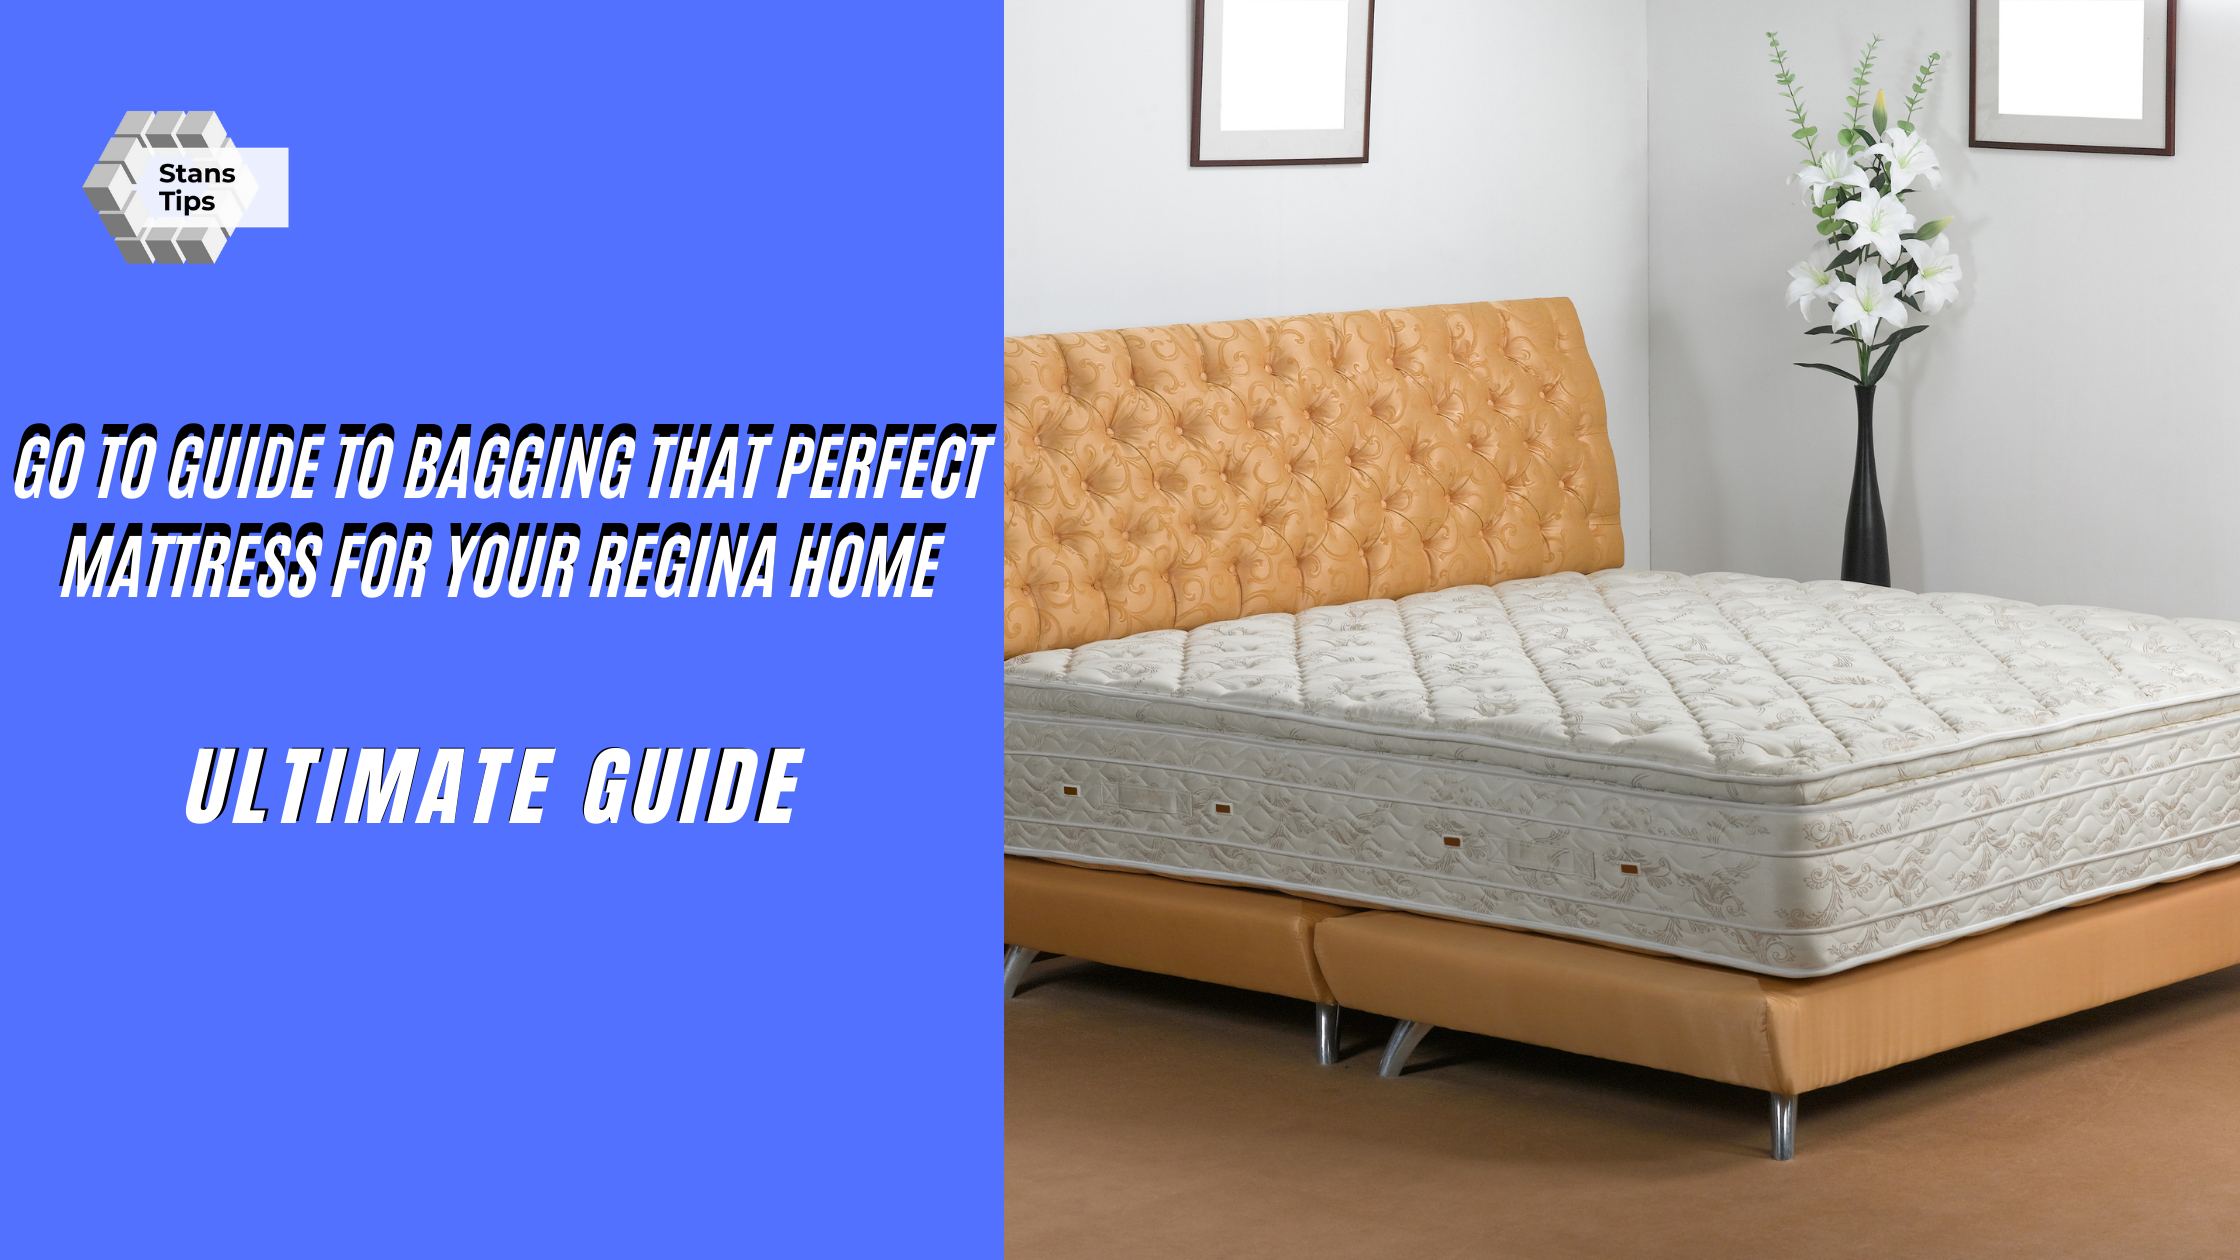 Perfect mattress for your regina home